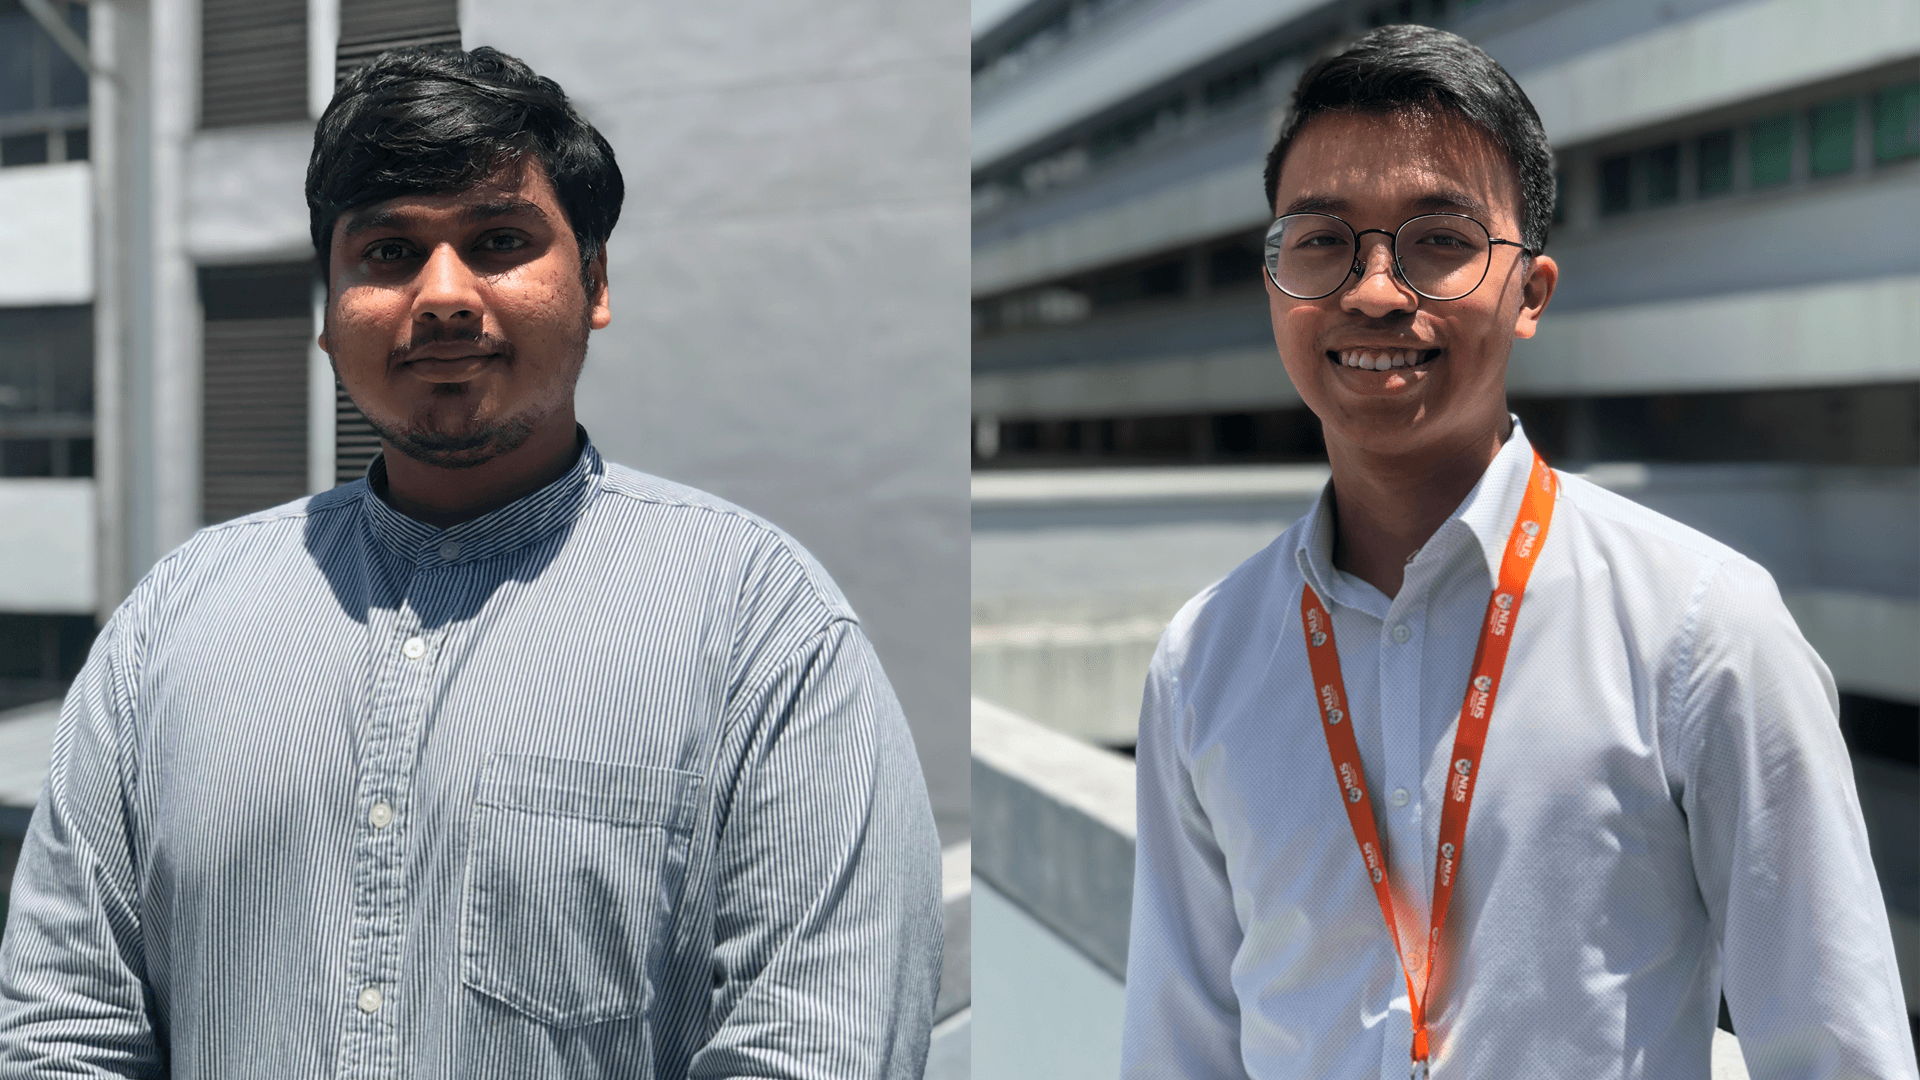 Students co-moderators Vamsi Krishna Alamuru and Mikhyle Bin Mat Nooh said the Q&A session had addressed many of the broad student concerns.